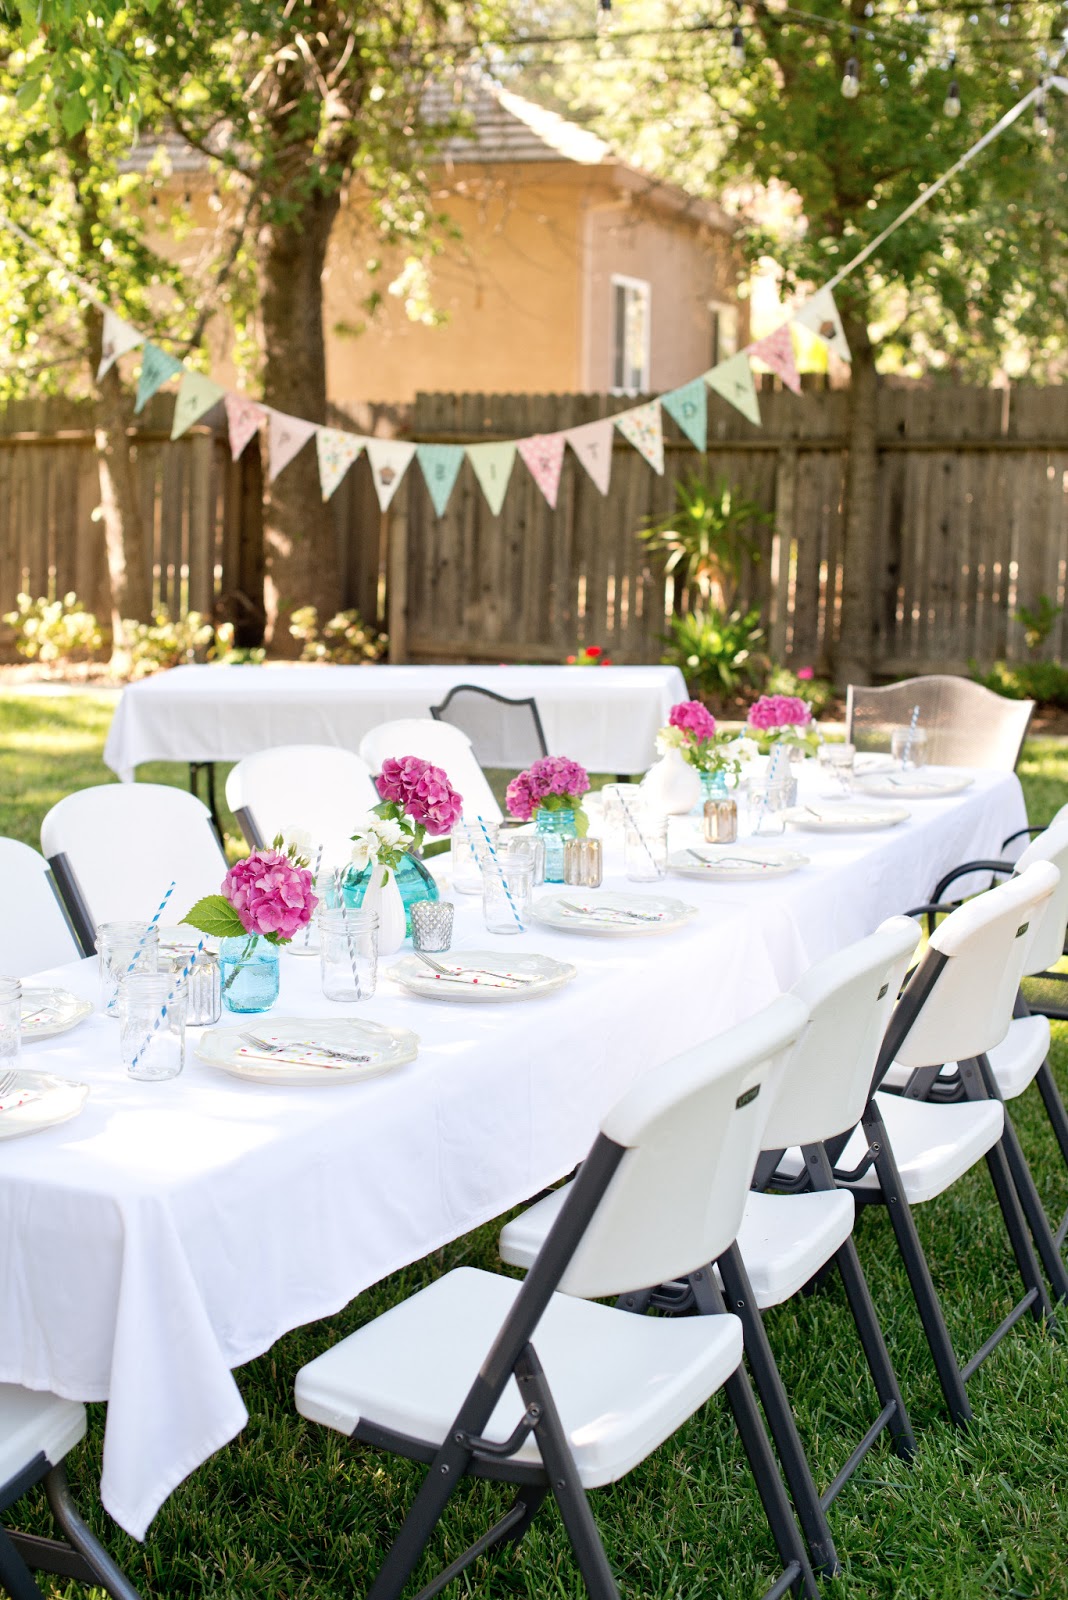 Ideas For A Backyard Party - Image to u